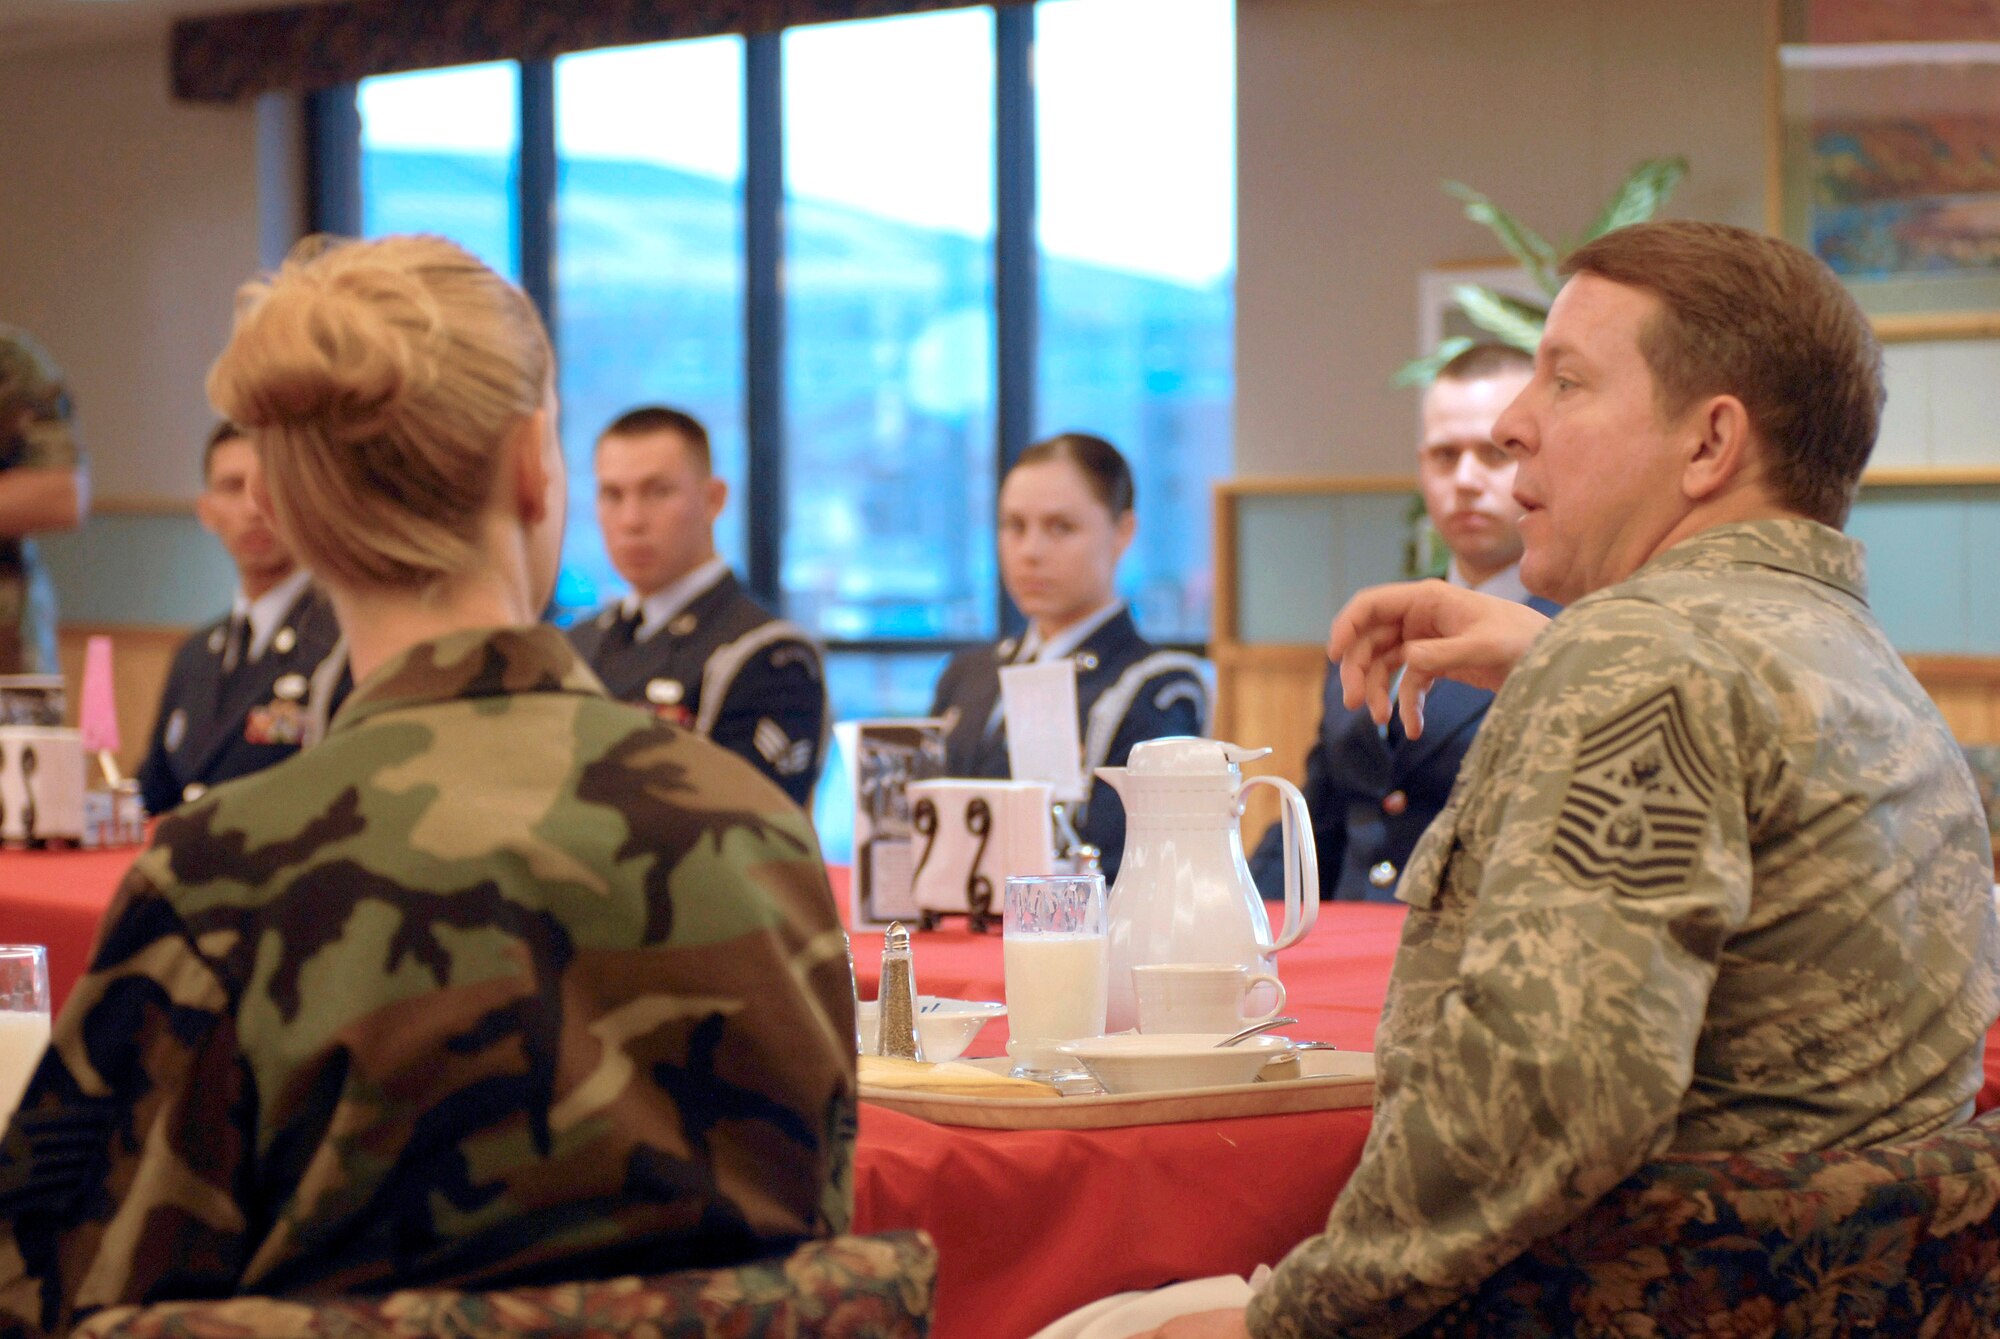 Chief Master Sgt. of the Air Force Rodney J. McKinley discusses various topics with Airmen during a breaksfast March 21 at Luke Air Force Base, Ariz. Chief McKinley was at Luke AFB as part of Air Force Week, which runs March 19 to 23. (U.S. Air Force photo/Senior Airman Christopher Hummel)